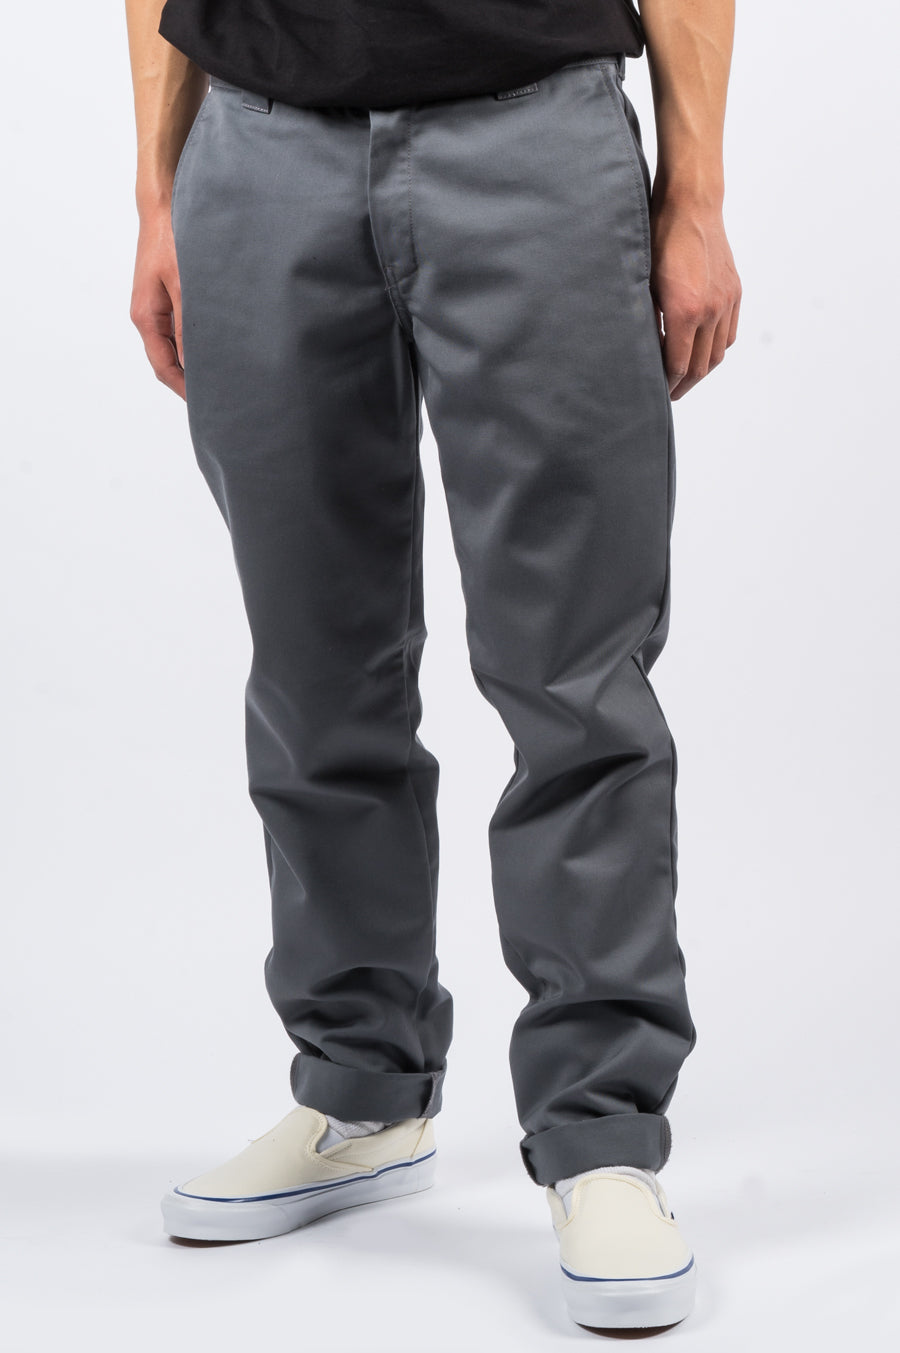 CARHARTT WIP MASTER PANT SHIVER – BLENDS